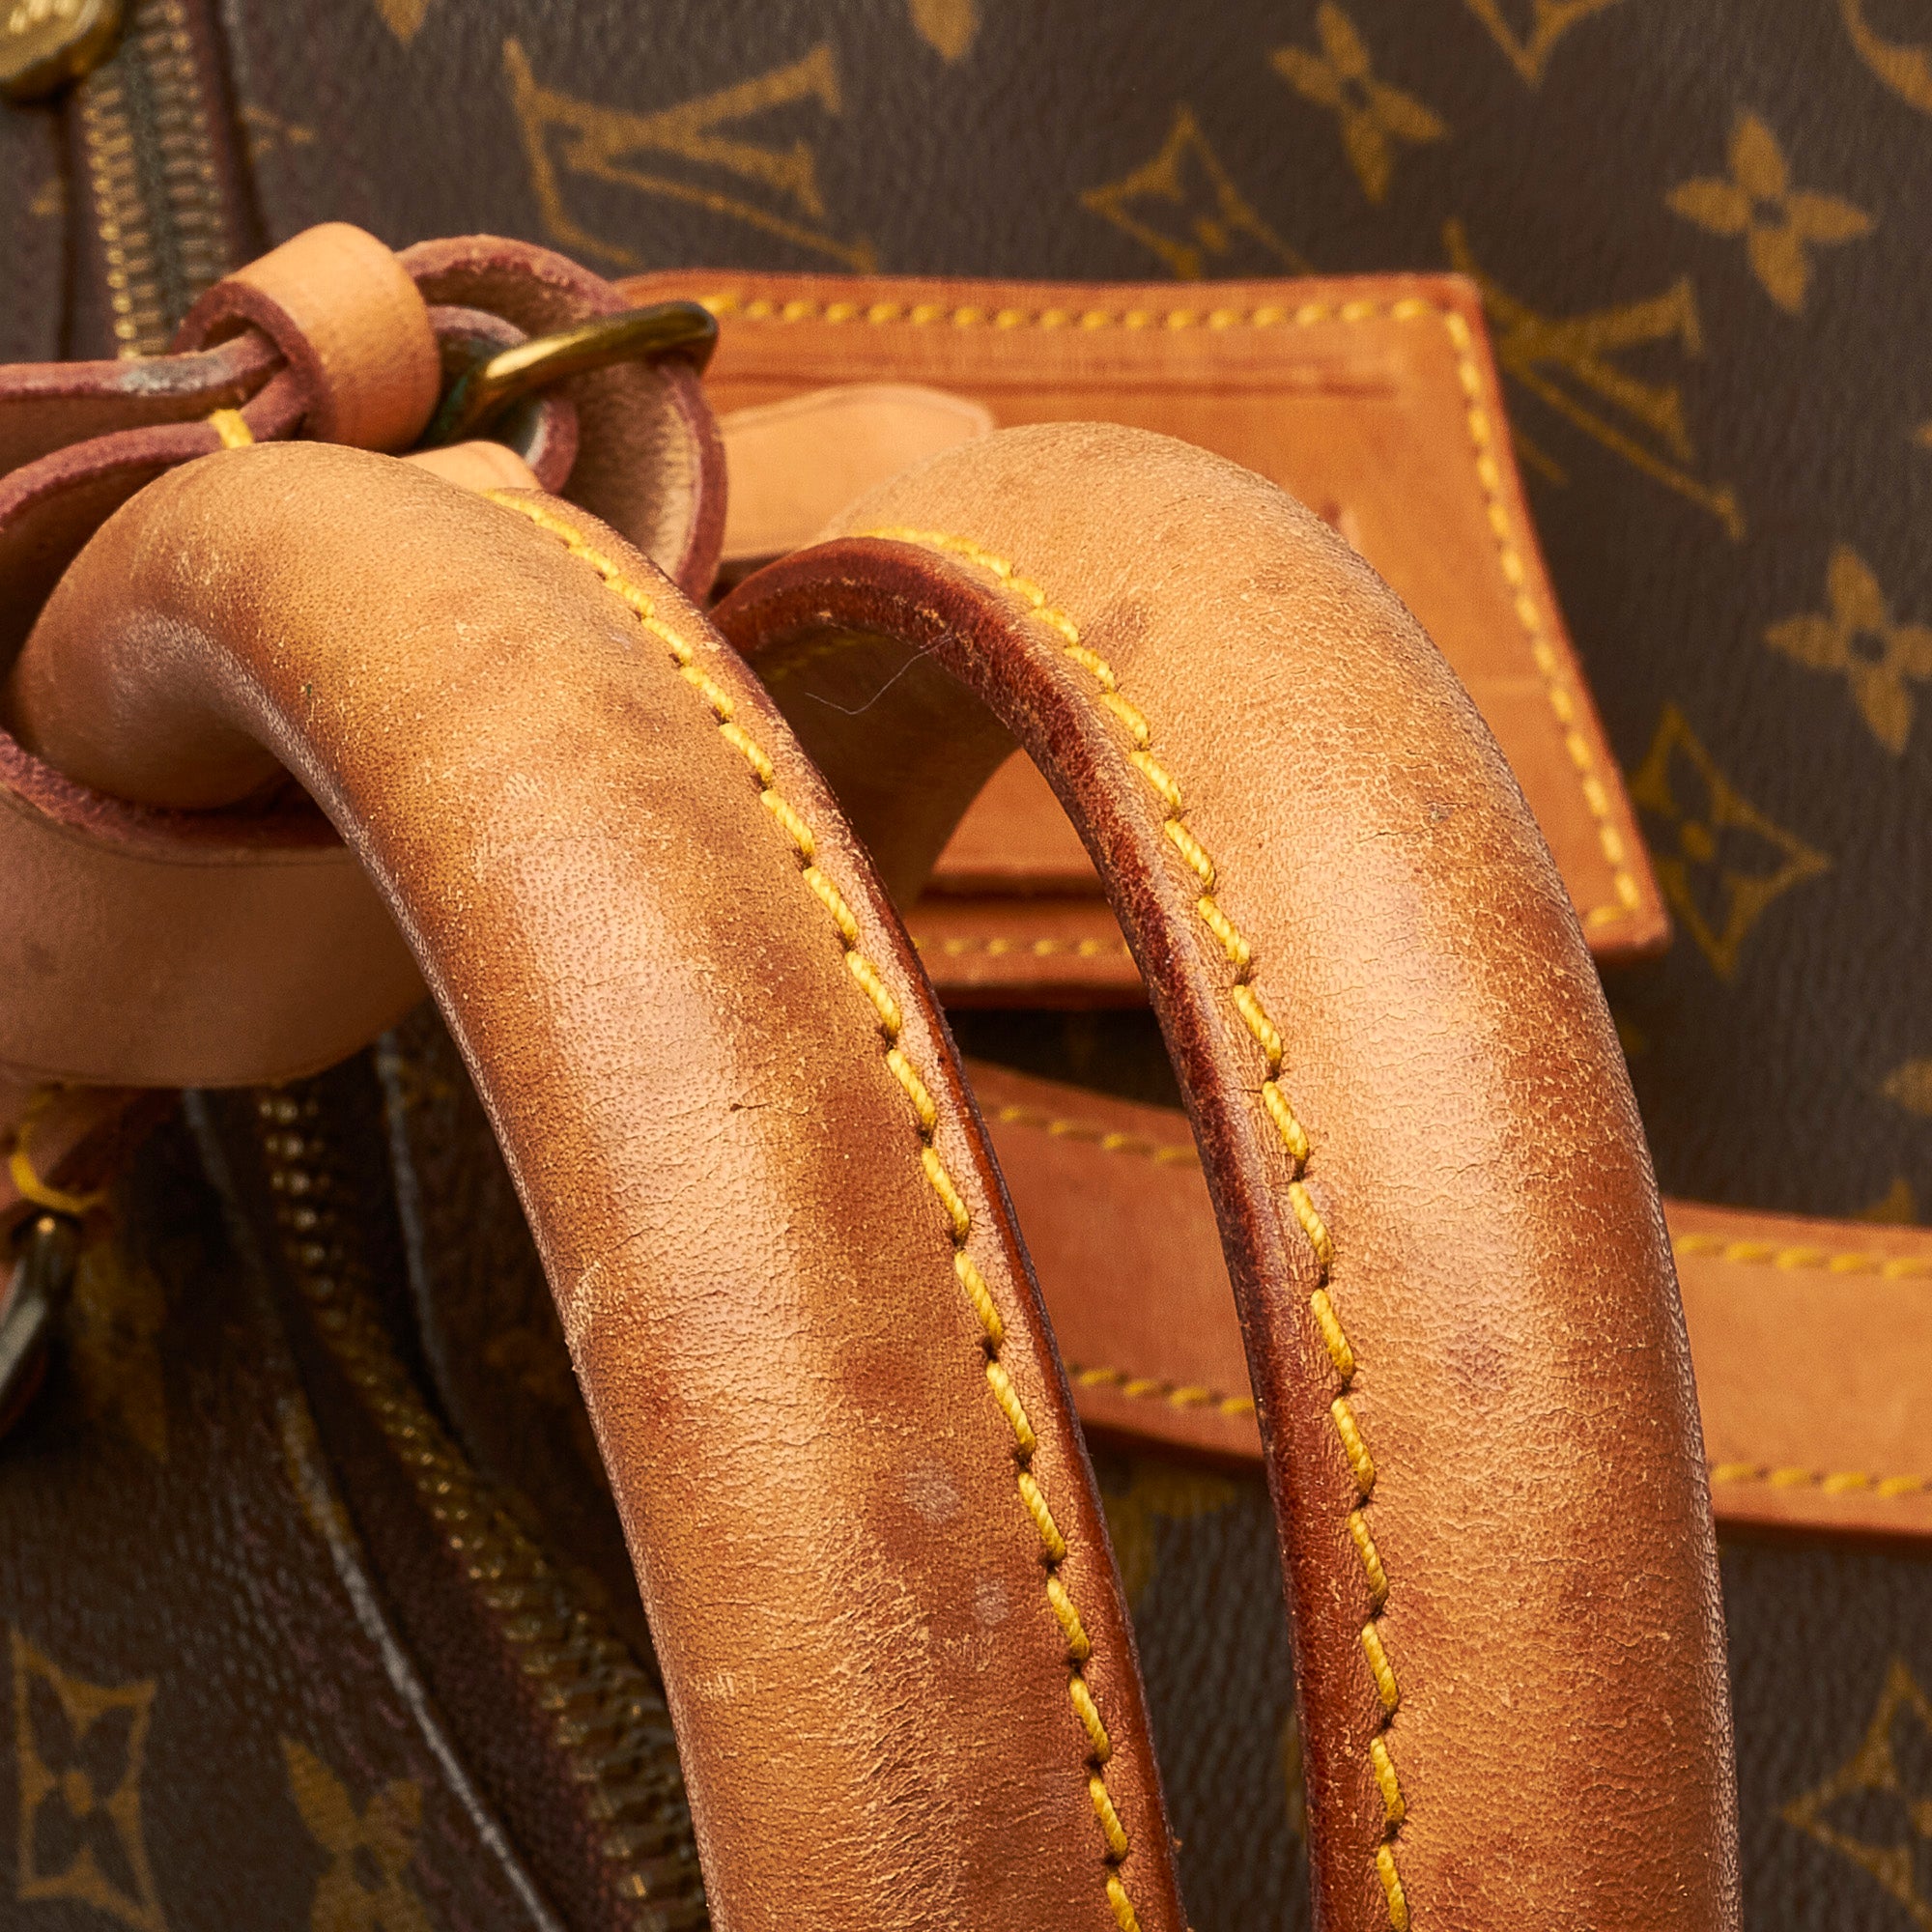 Louis Vuitton Monogram Keepall 60 - Brown Luggage and Travel